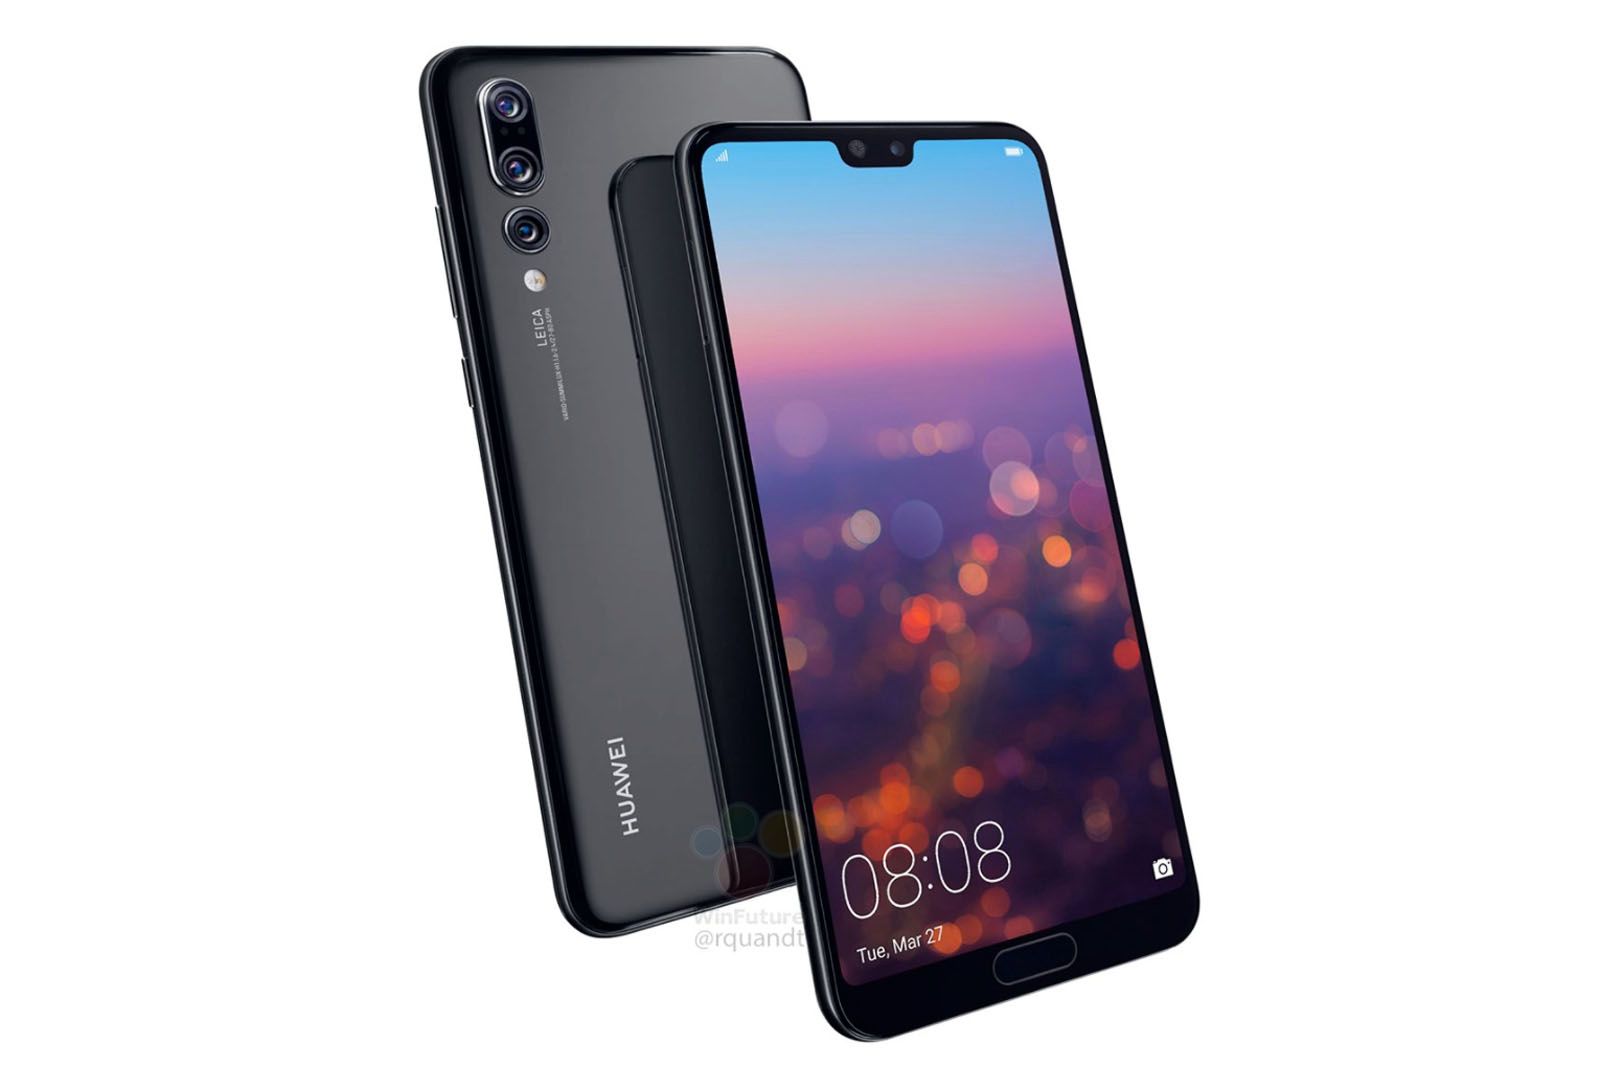 How to watch the Huawei P20 and P20 Pro launch live image 1